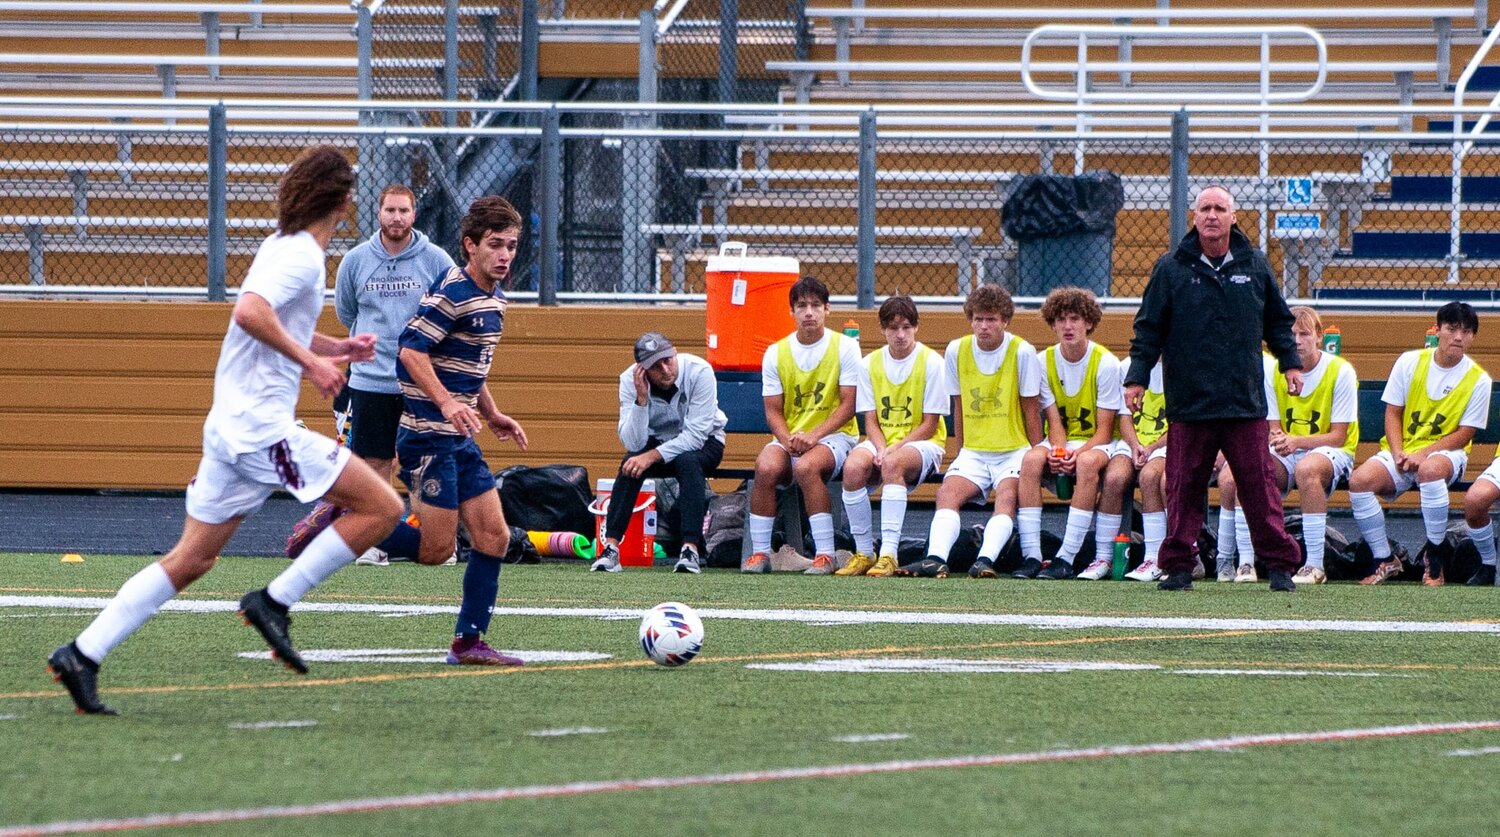 Severna Park’s Andrew Campbell dribbled the ball on the way to scoring the first goal of Tuesday’s game.